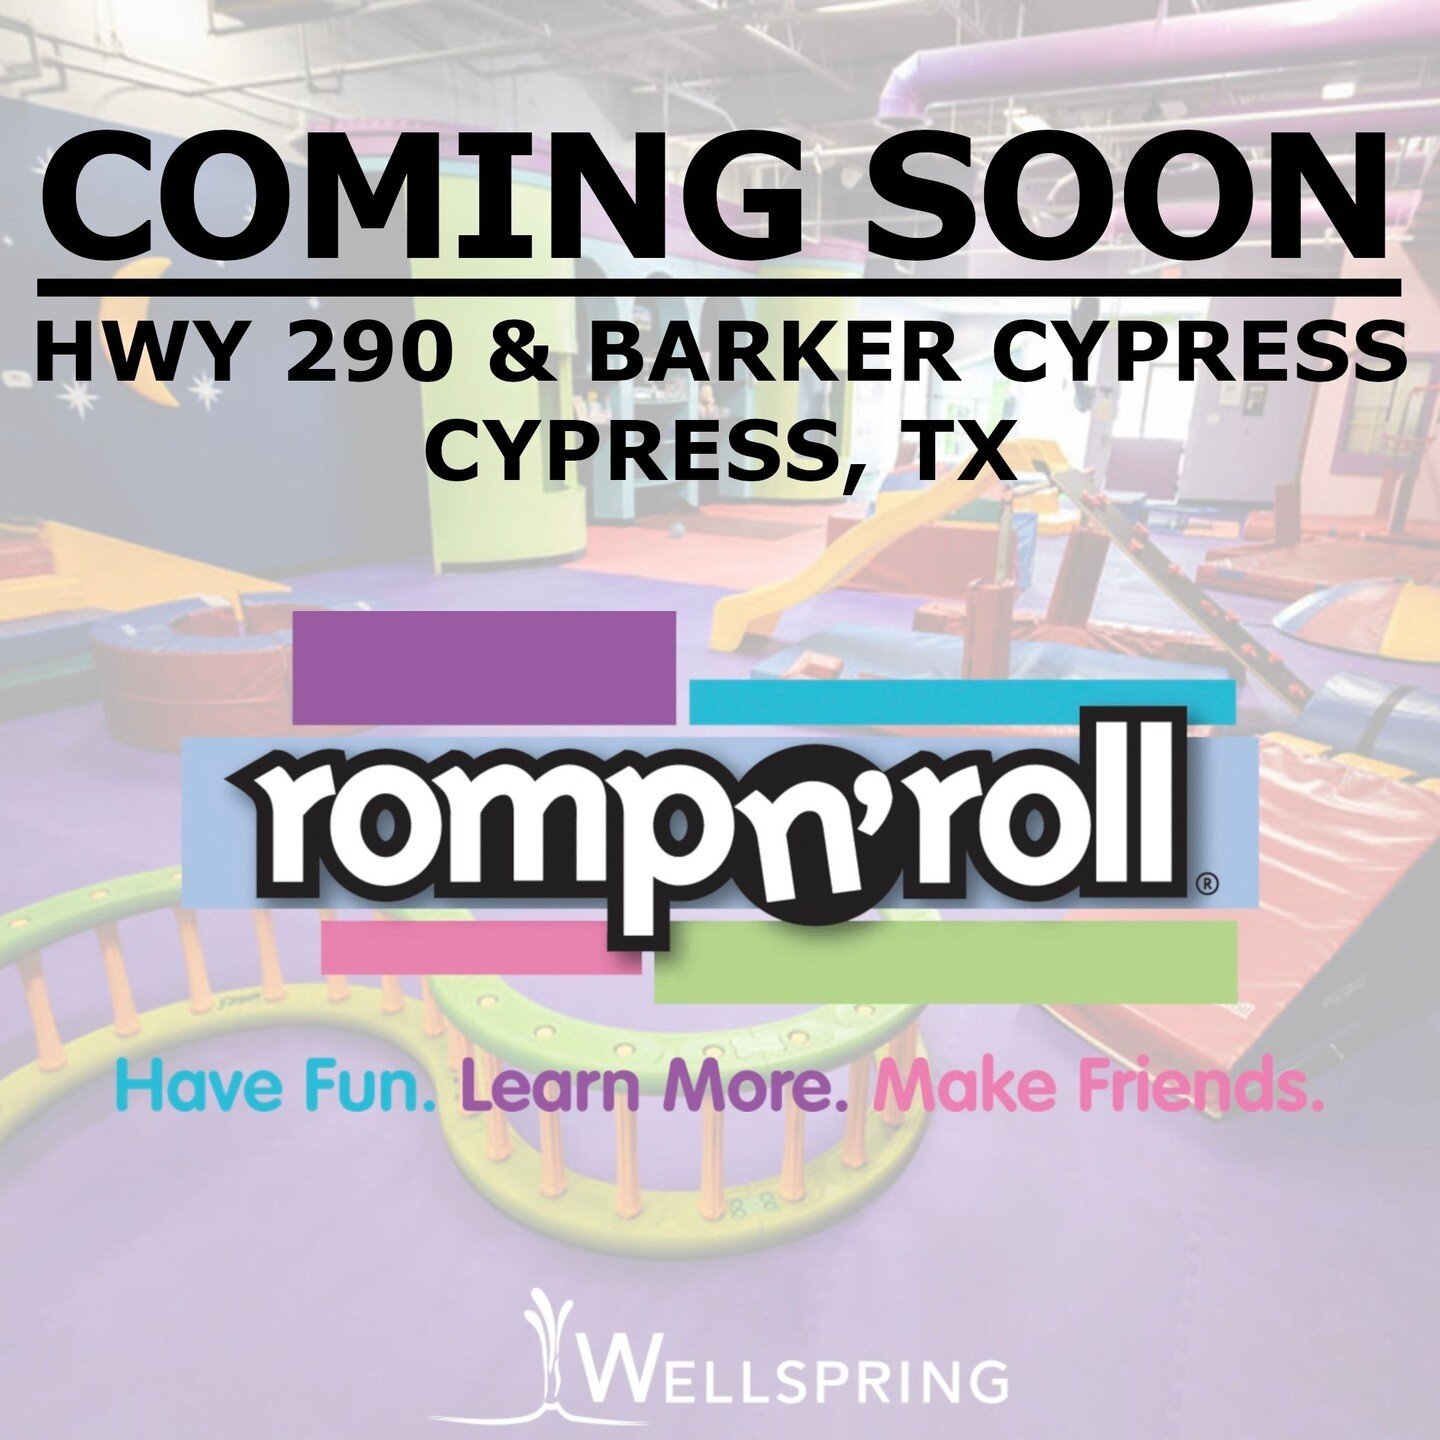 Early childhood education should be fun, interactive, and safe - which is everything you&rsquo;ll find at Romp N&rsquo; Roll! Wellspring Commercial Real Estate is pleased to announce a great new activity space for kids in Cypress at Hwy 290 &amp; Bar